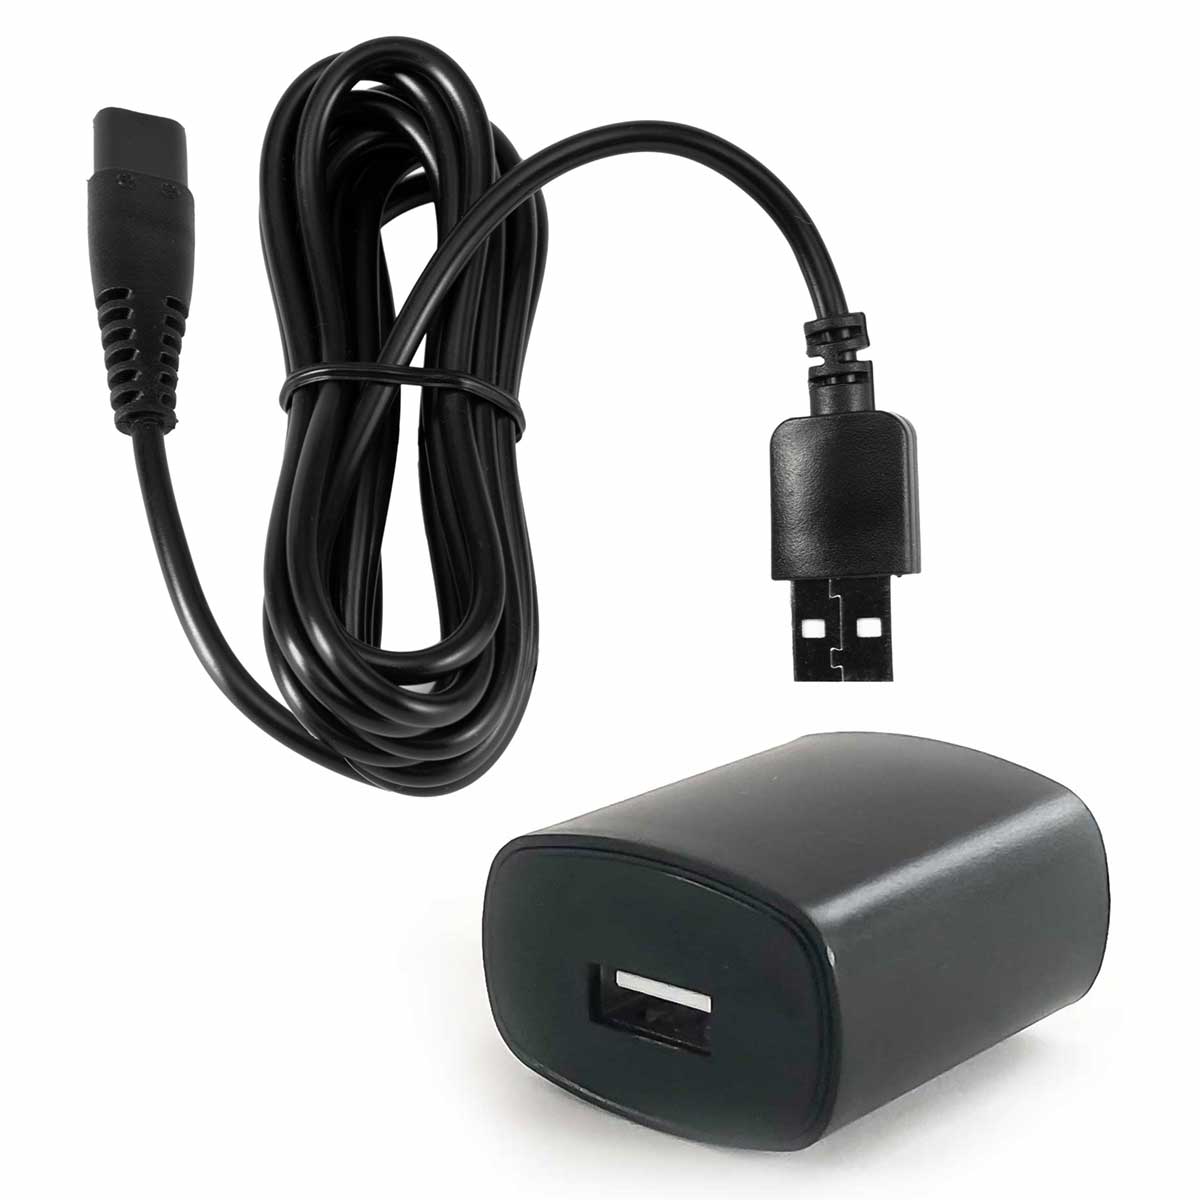 Replacement wall adapter and USB cord (Refurbished)